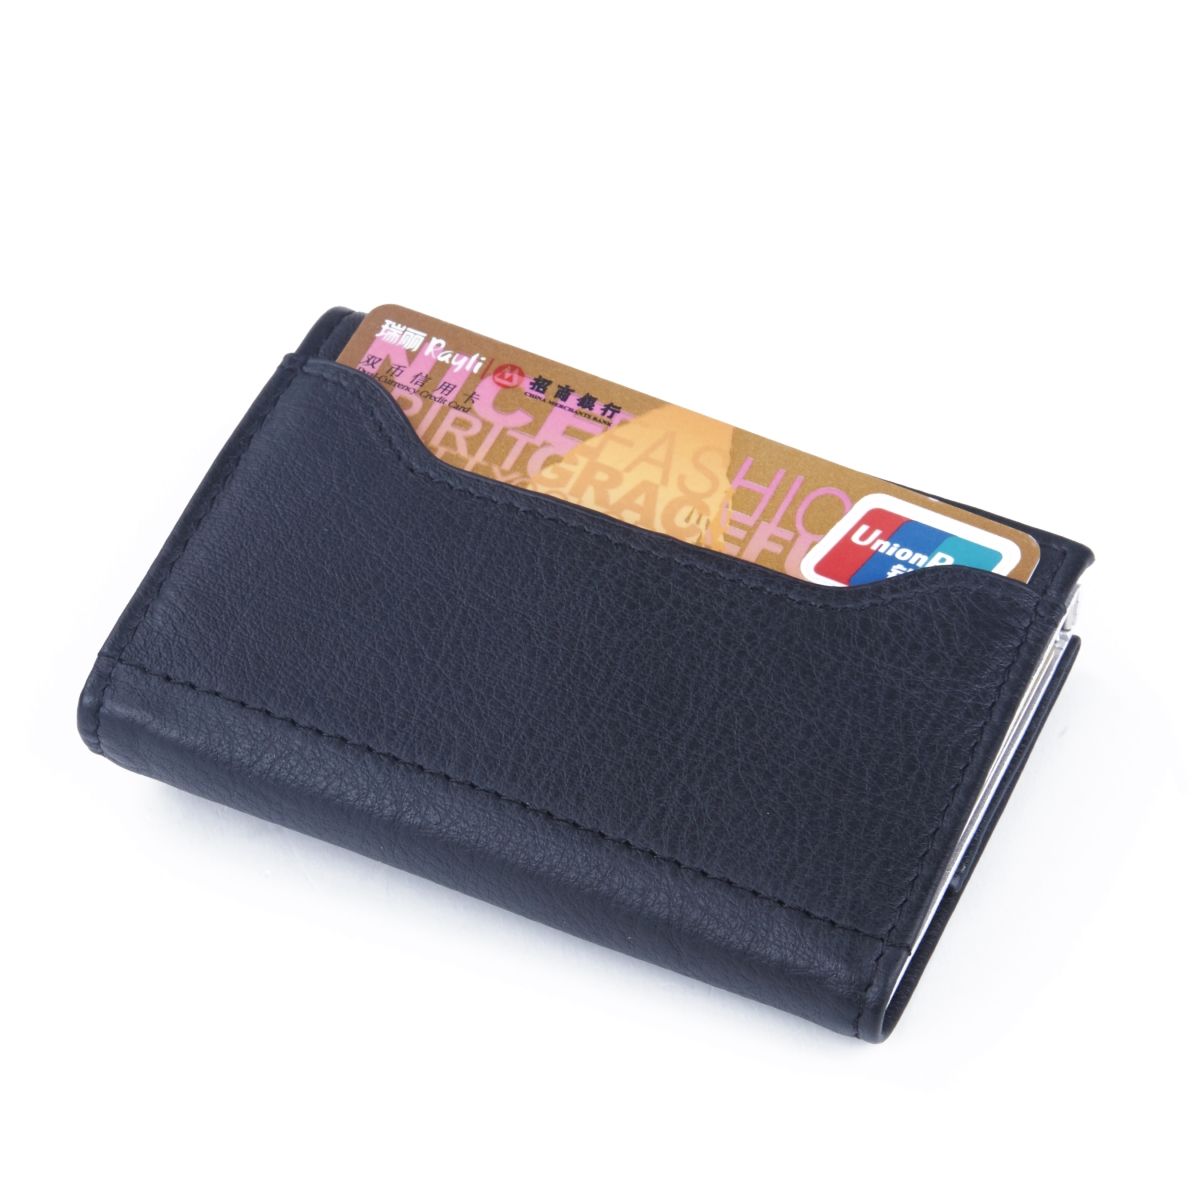 C-Secure Aluminum Card Holder with PU Leather - Grey